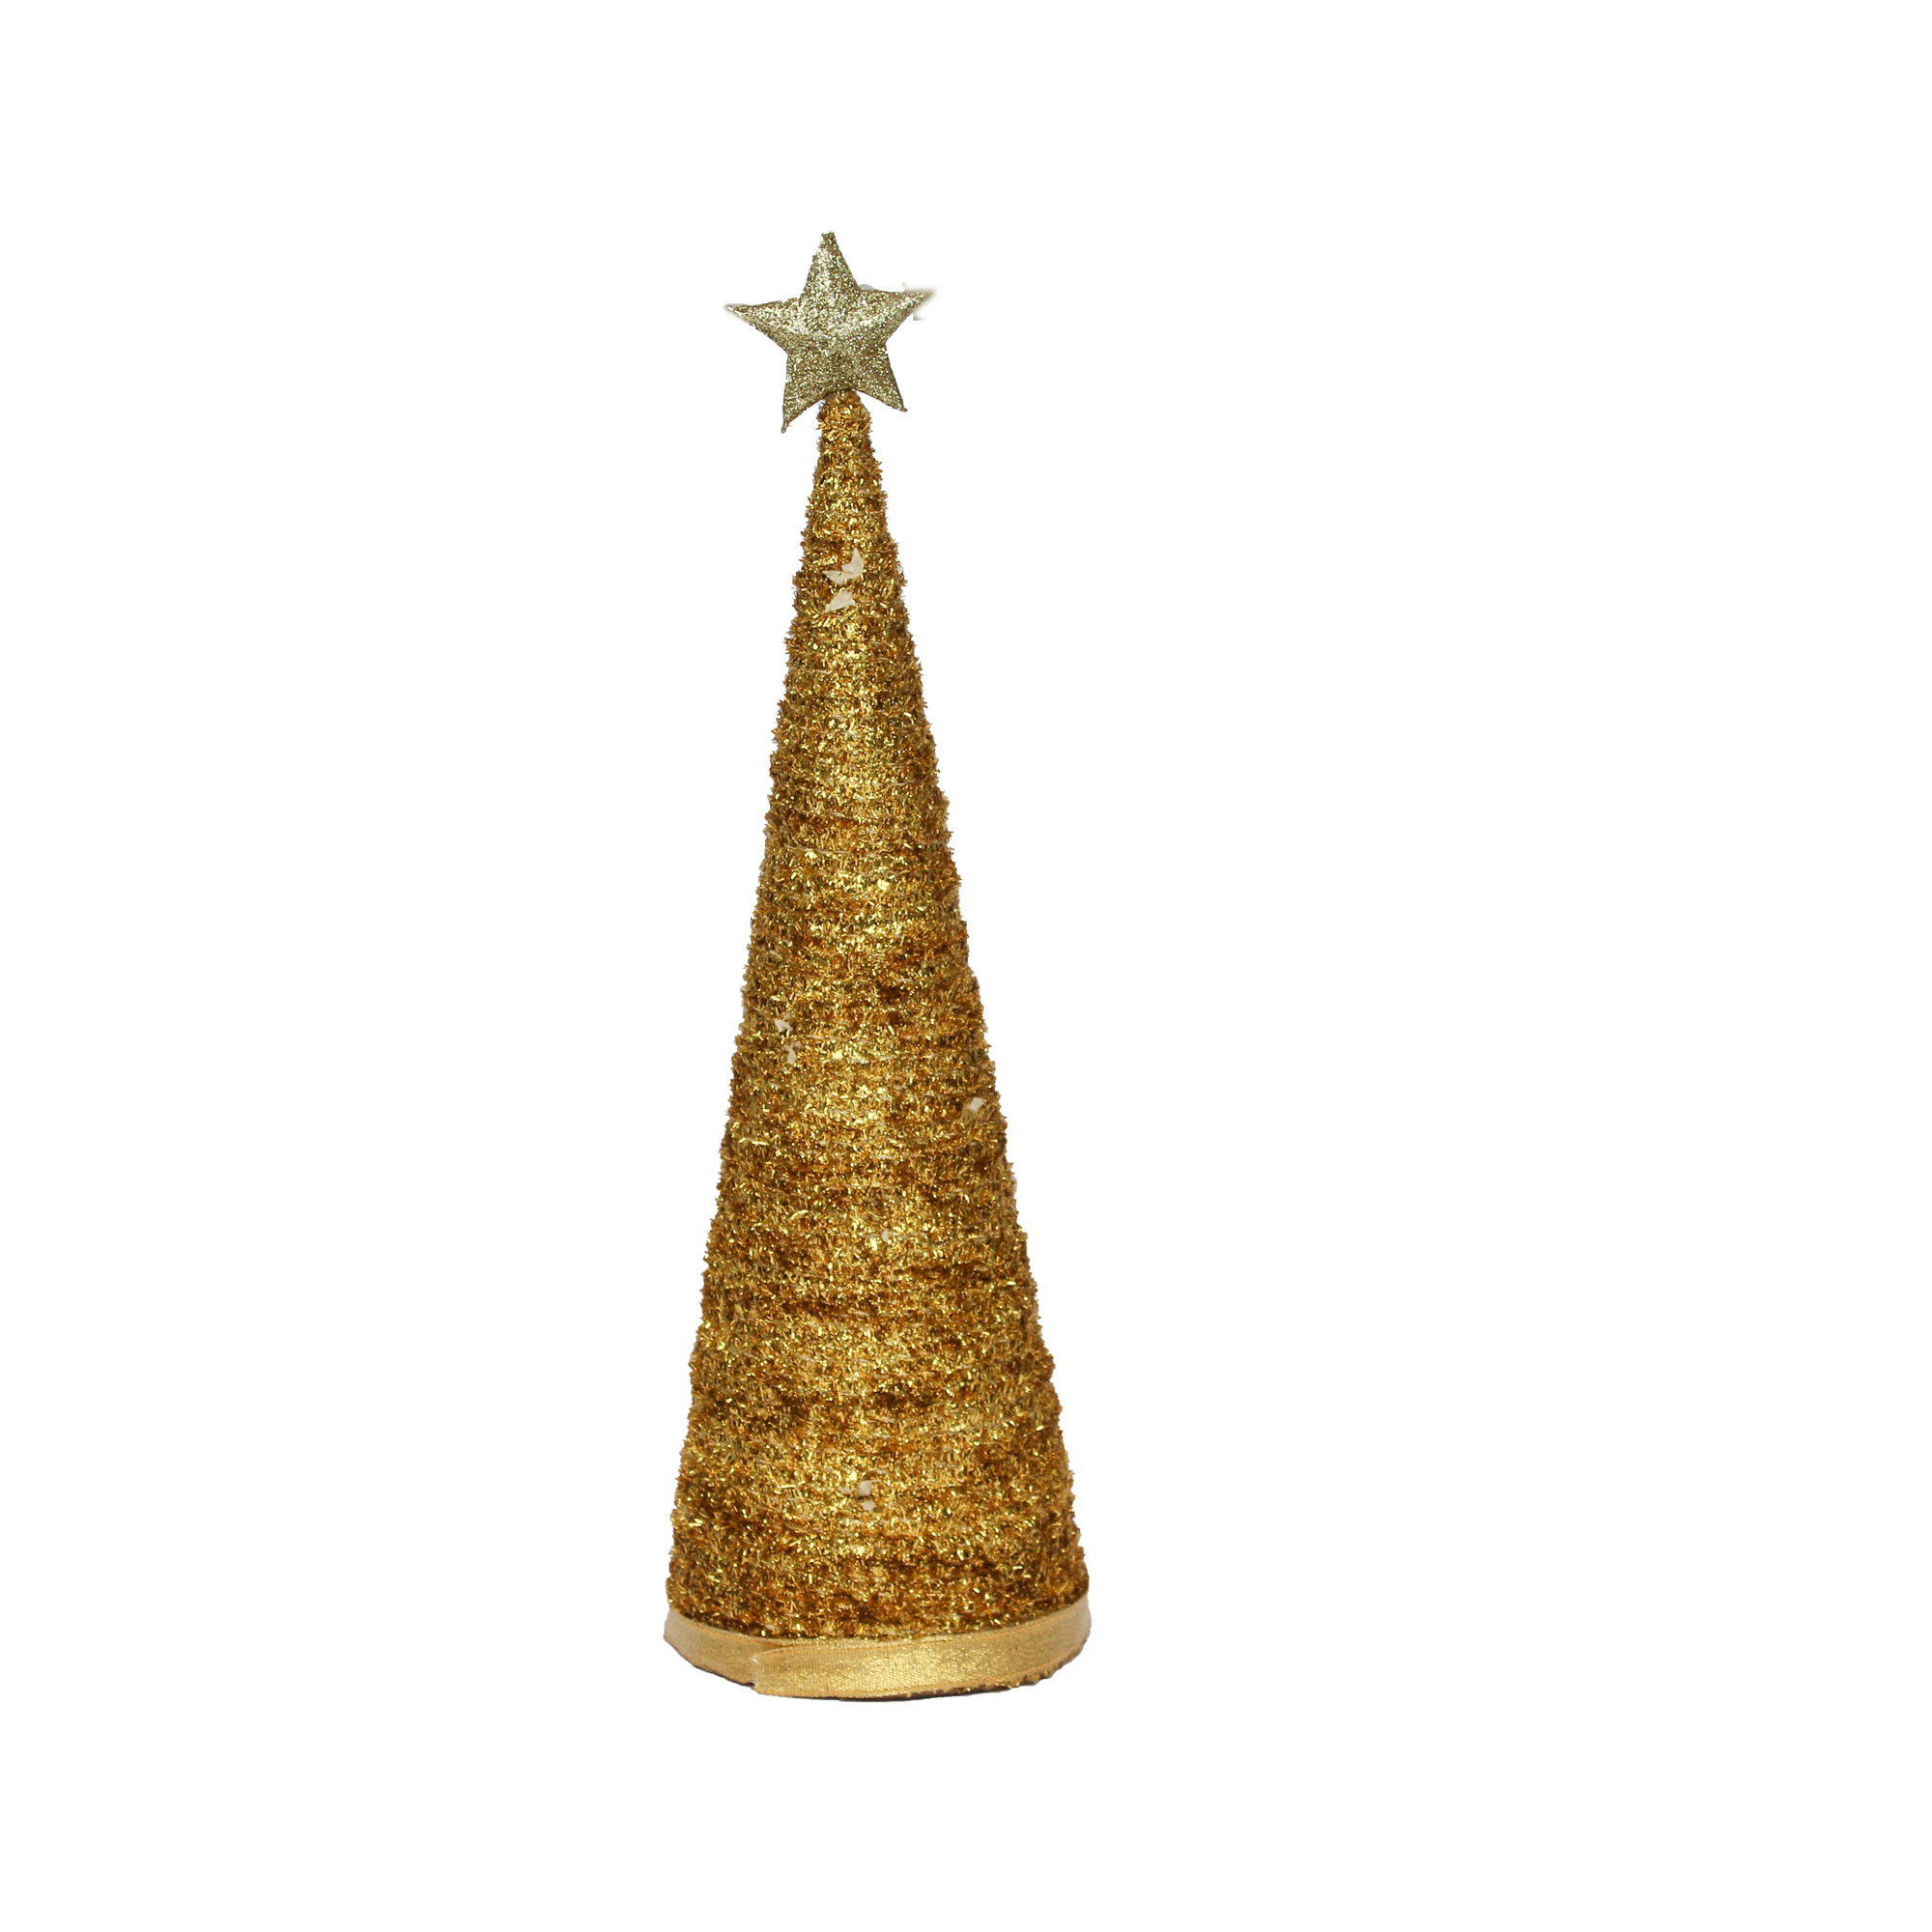 Handmade Conical Christmas Tinsel Tree with Sequins and Star - 14.5 X 4inch, Gold, 1pc